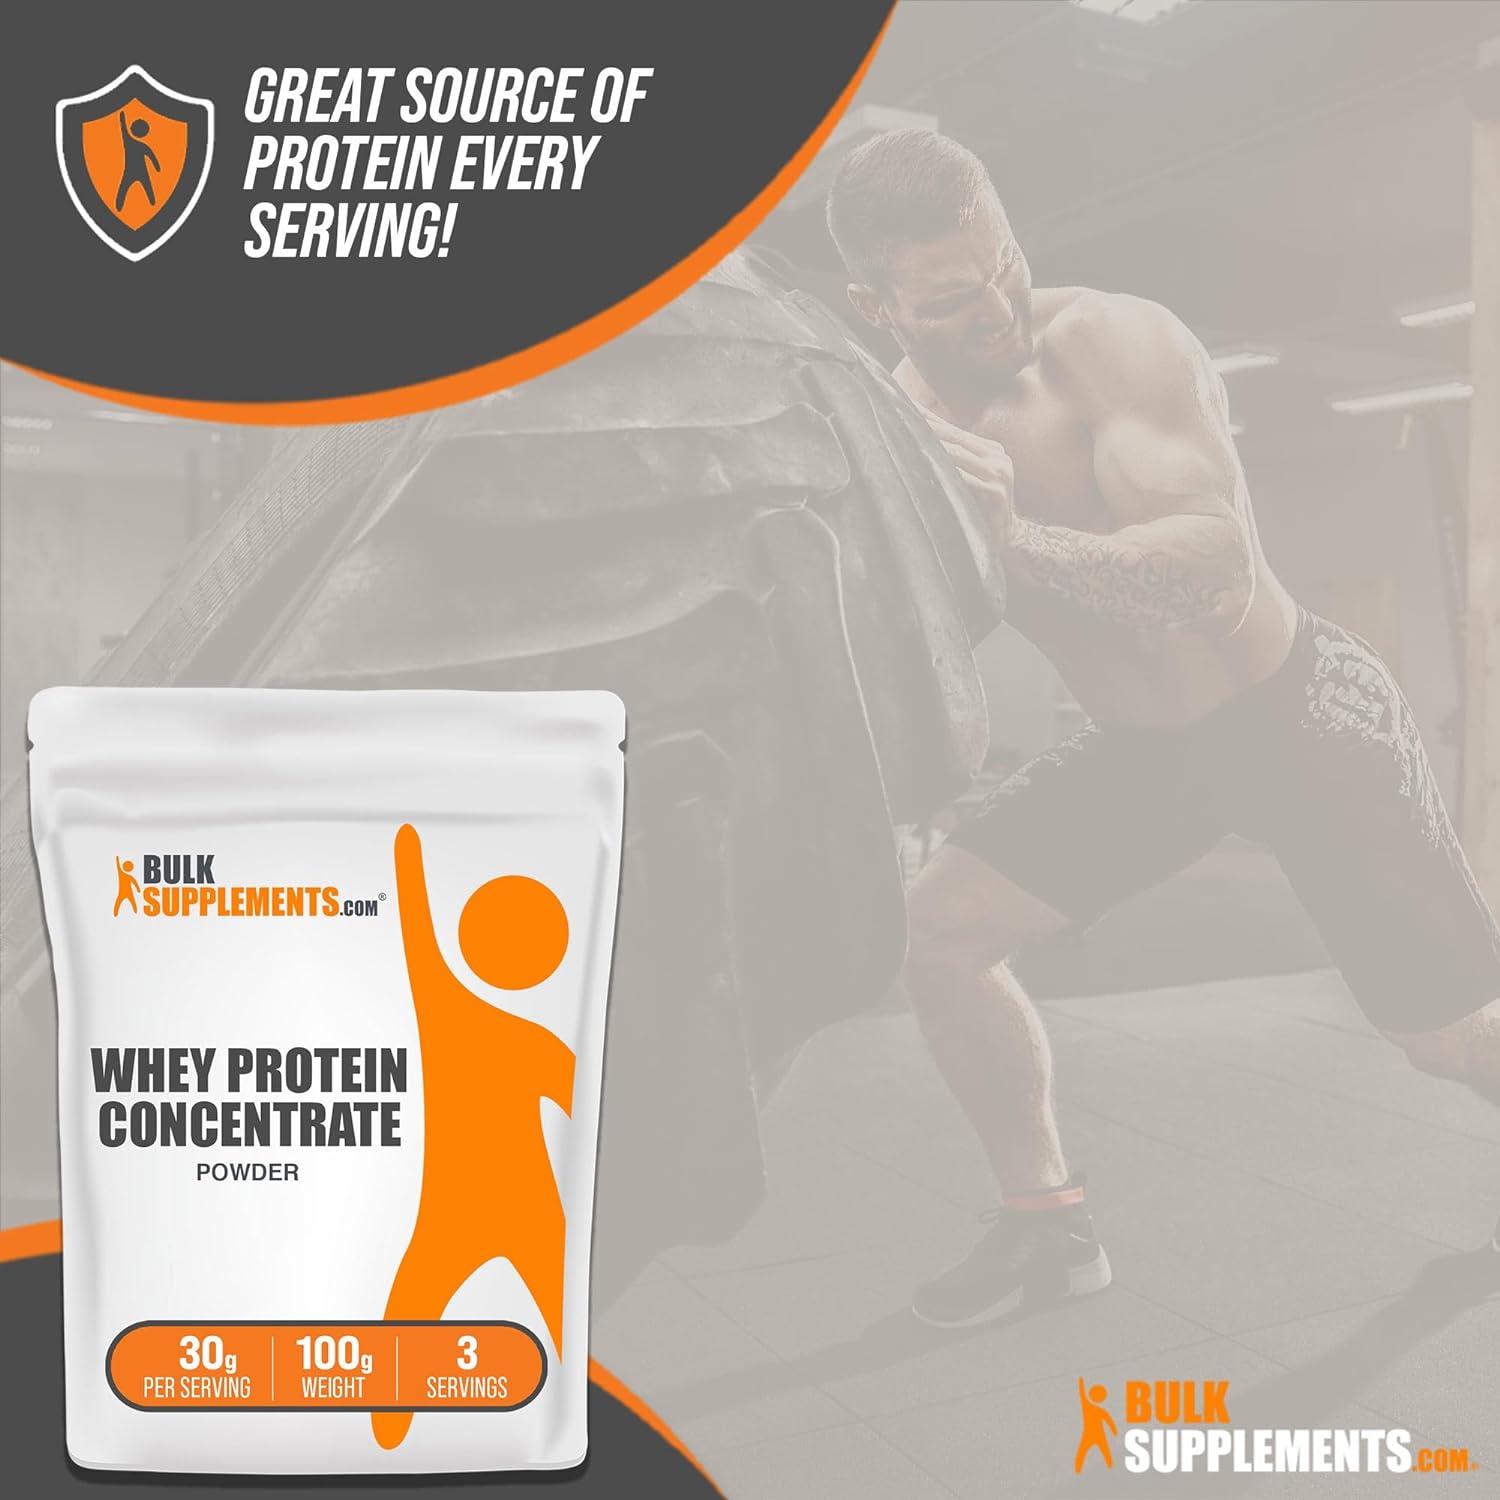 BULKSUPPLEMENTS.COM Whey Protein Concentrate Powder - Unflavored Prote